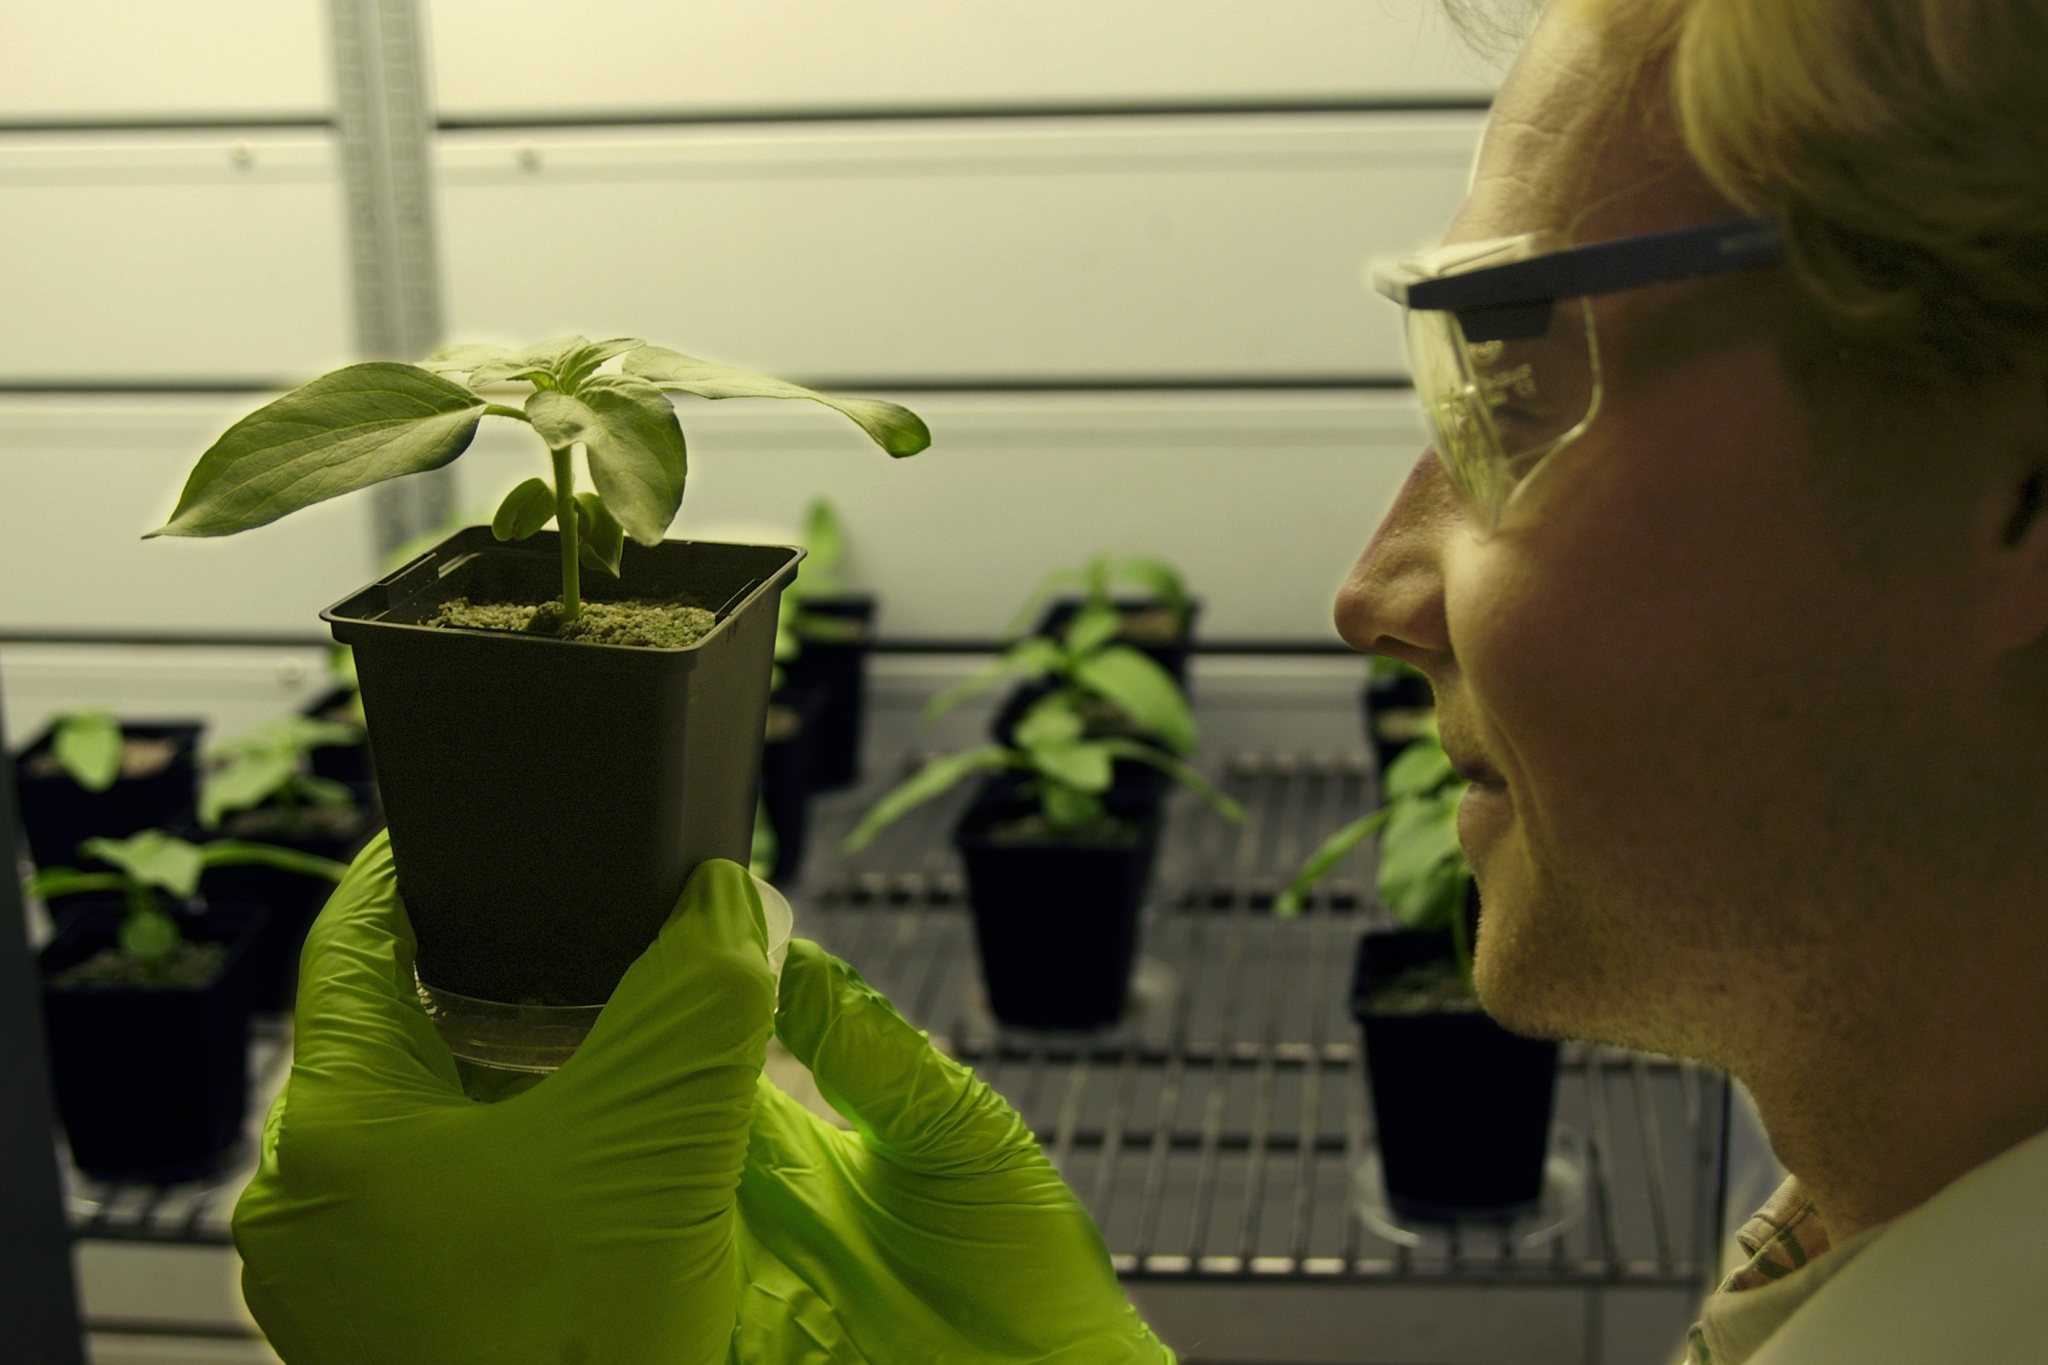 The photo shows a researcher with a plant in a laboratory.